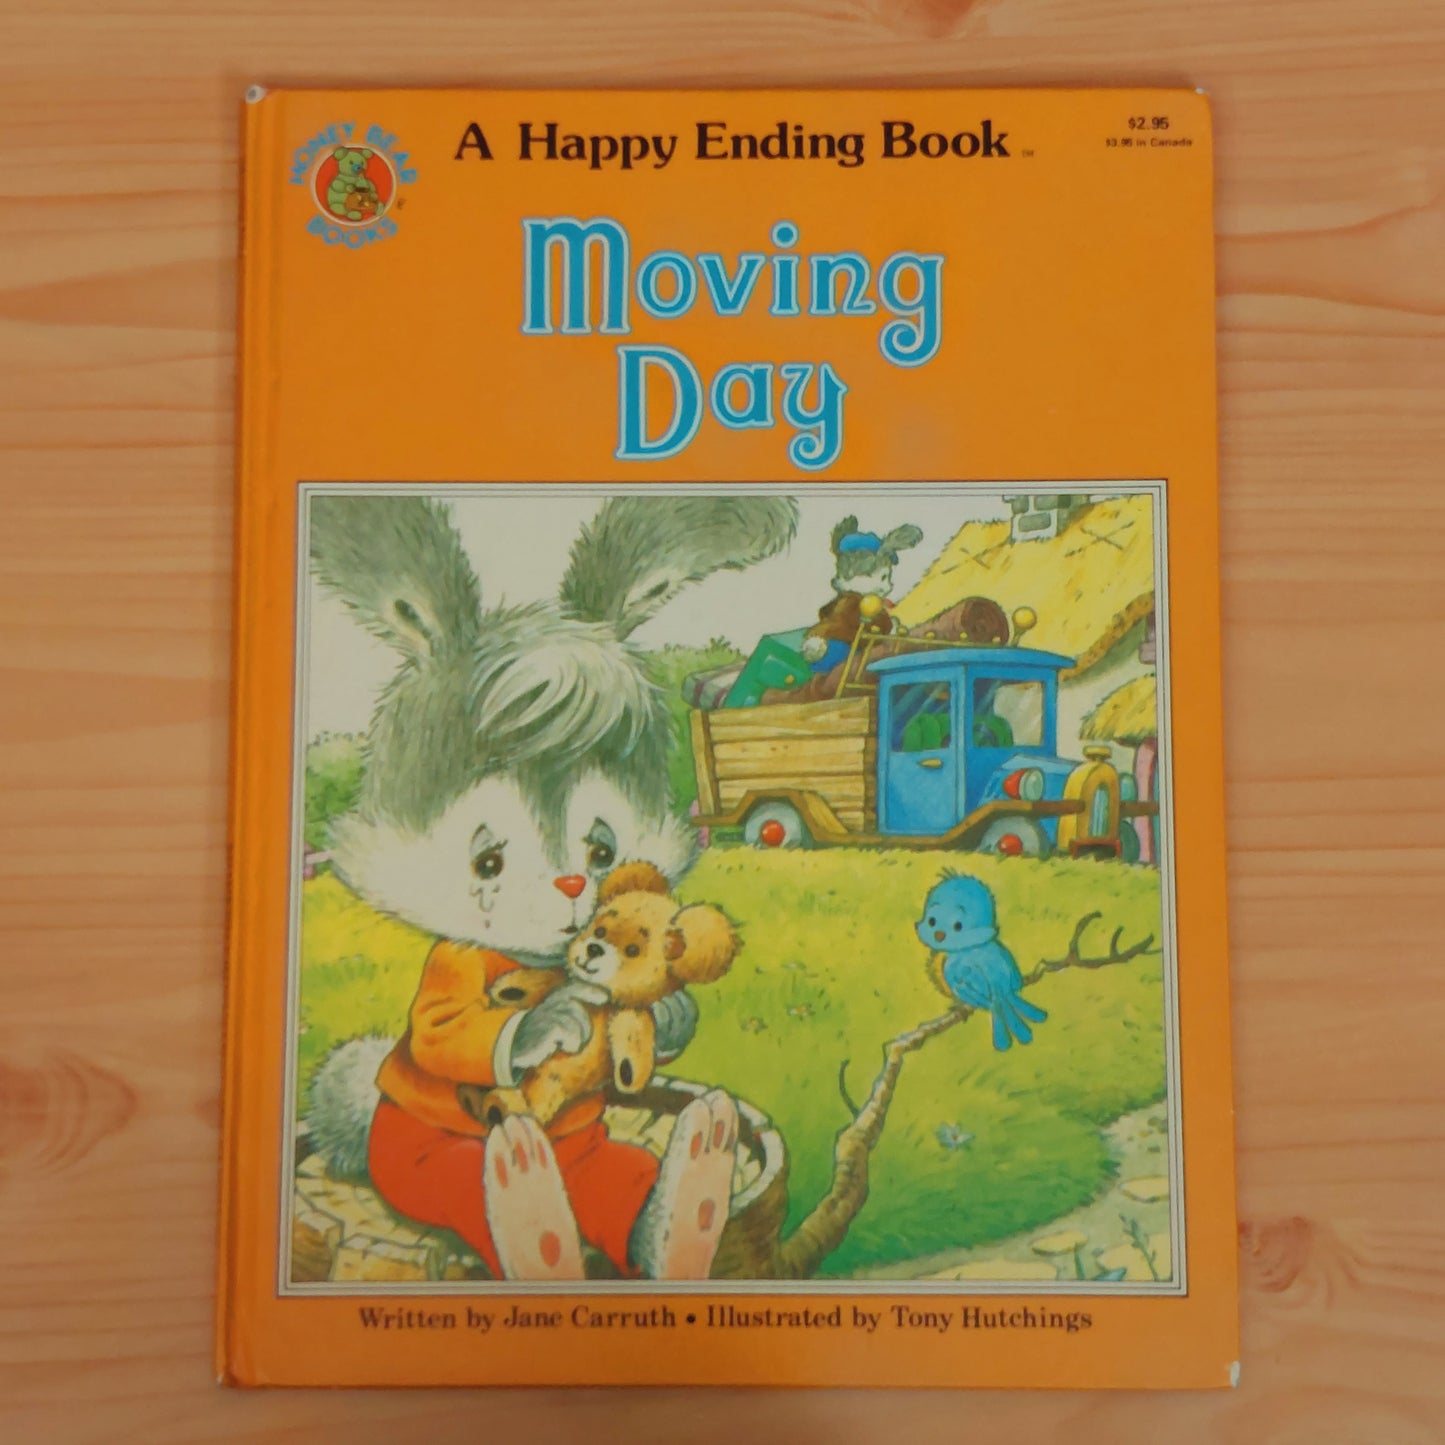 A Happy Ending Book - Moving Day